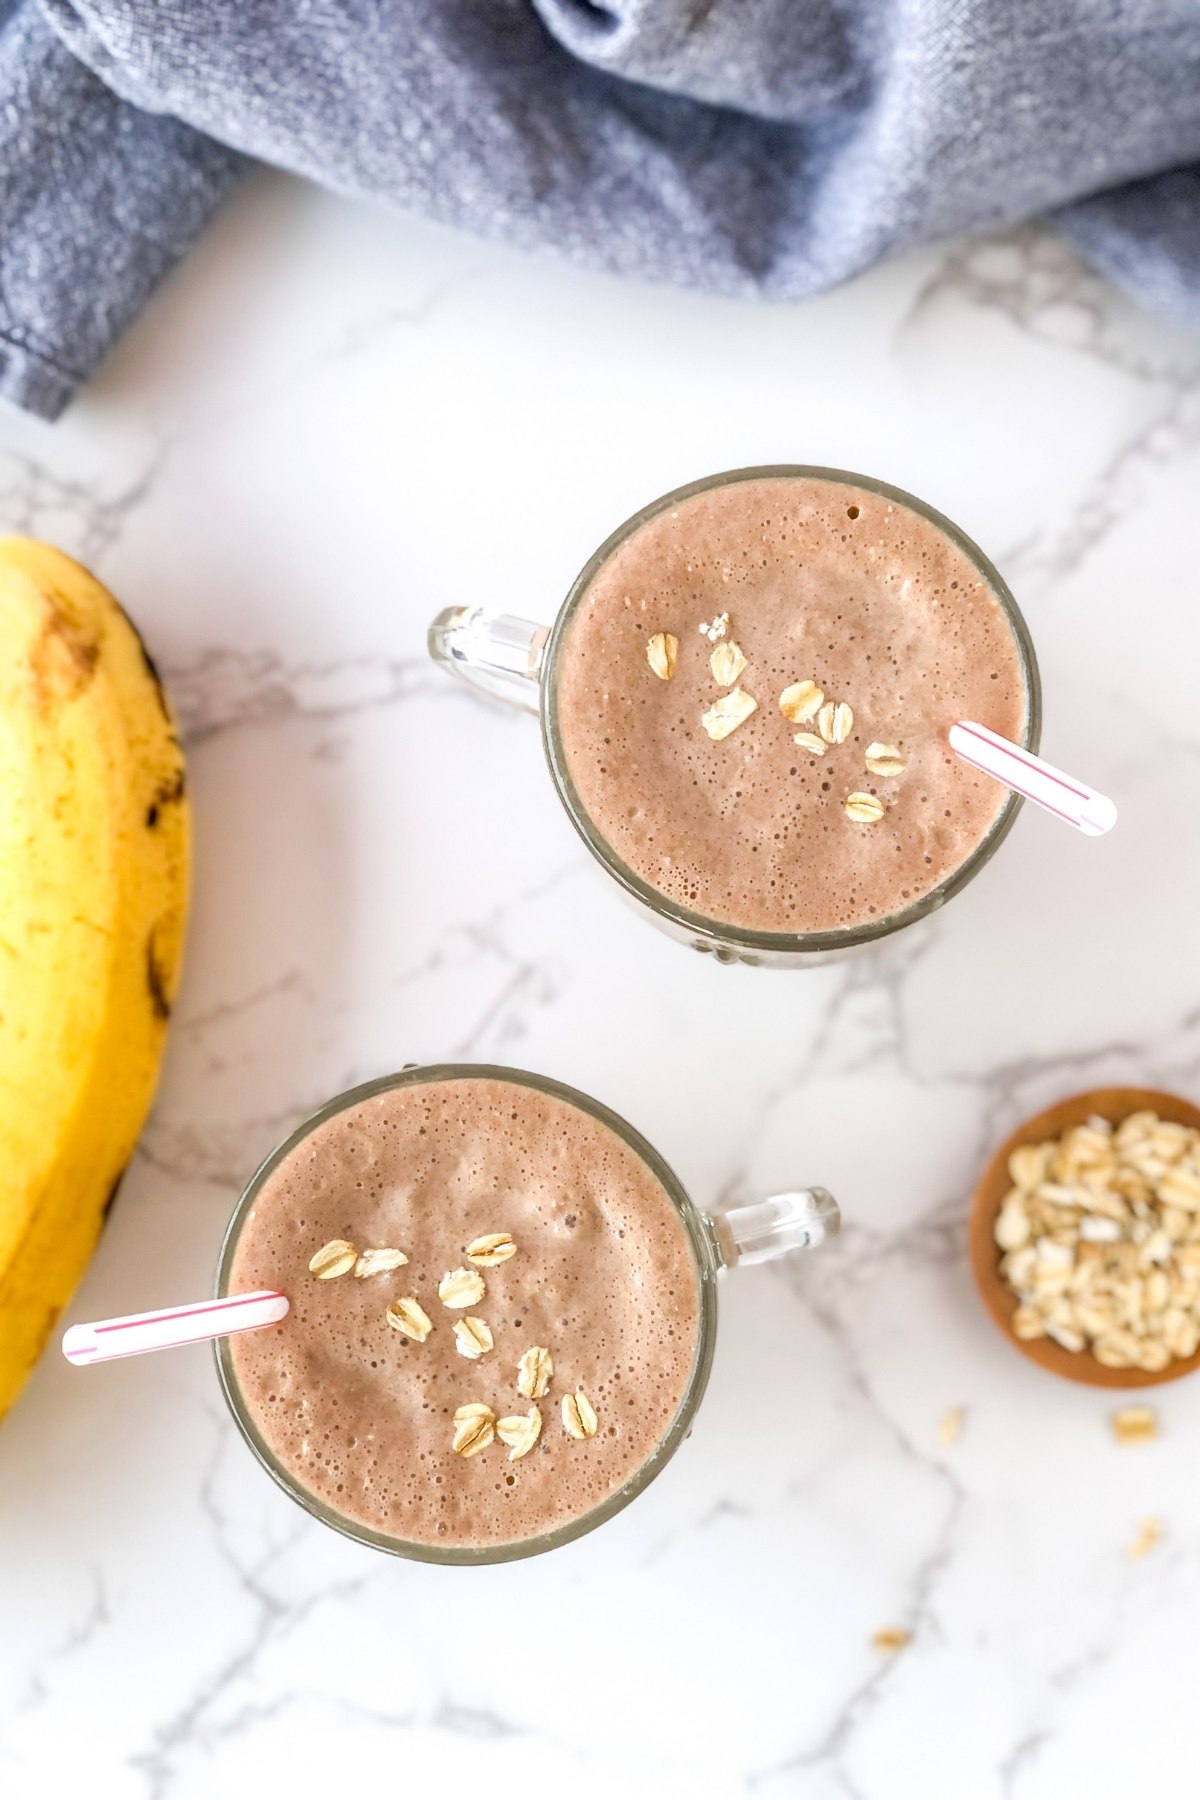 banana Nutella smoothie with oats